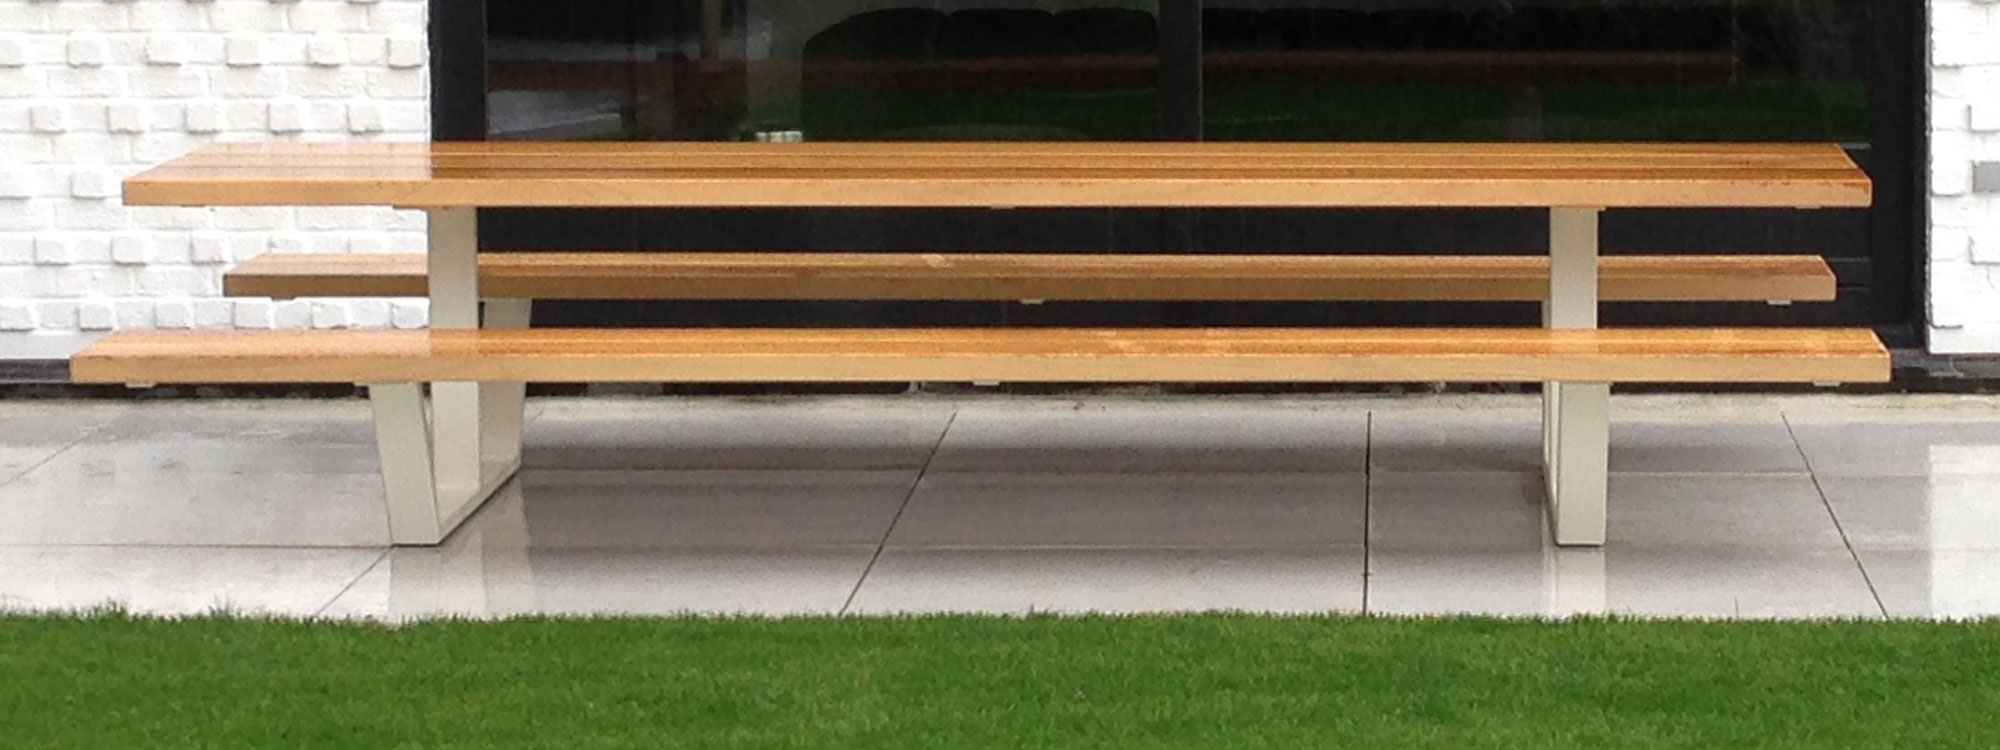 Image showing Linear Design Of Cassecroute MODERN Picnic Table & benches